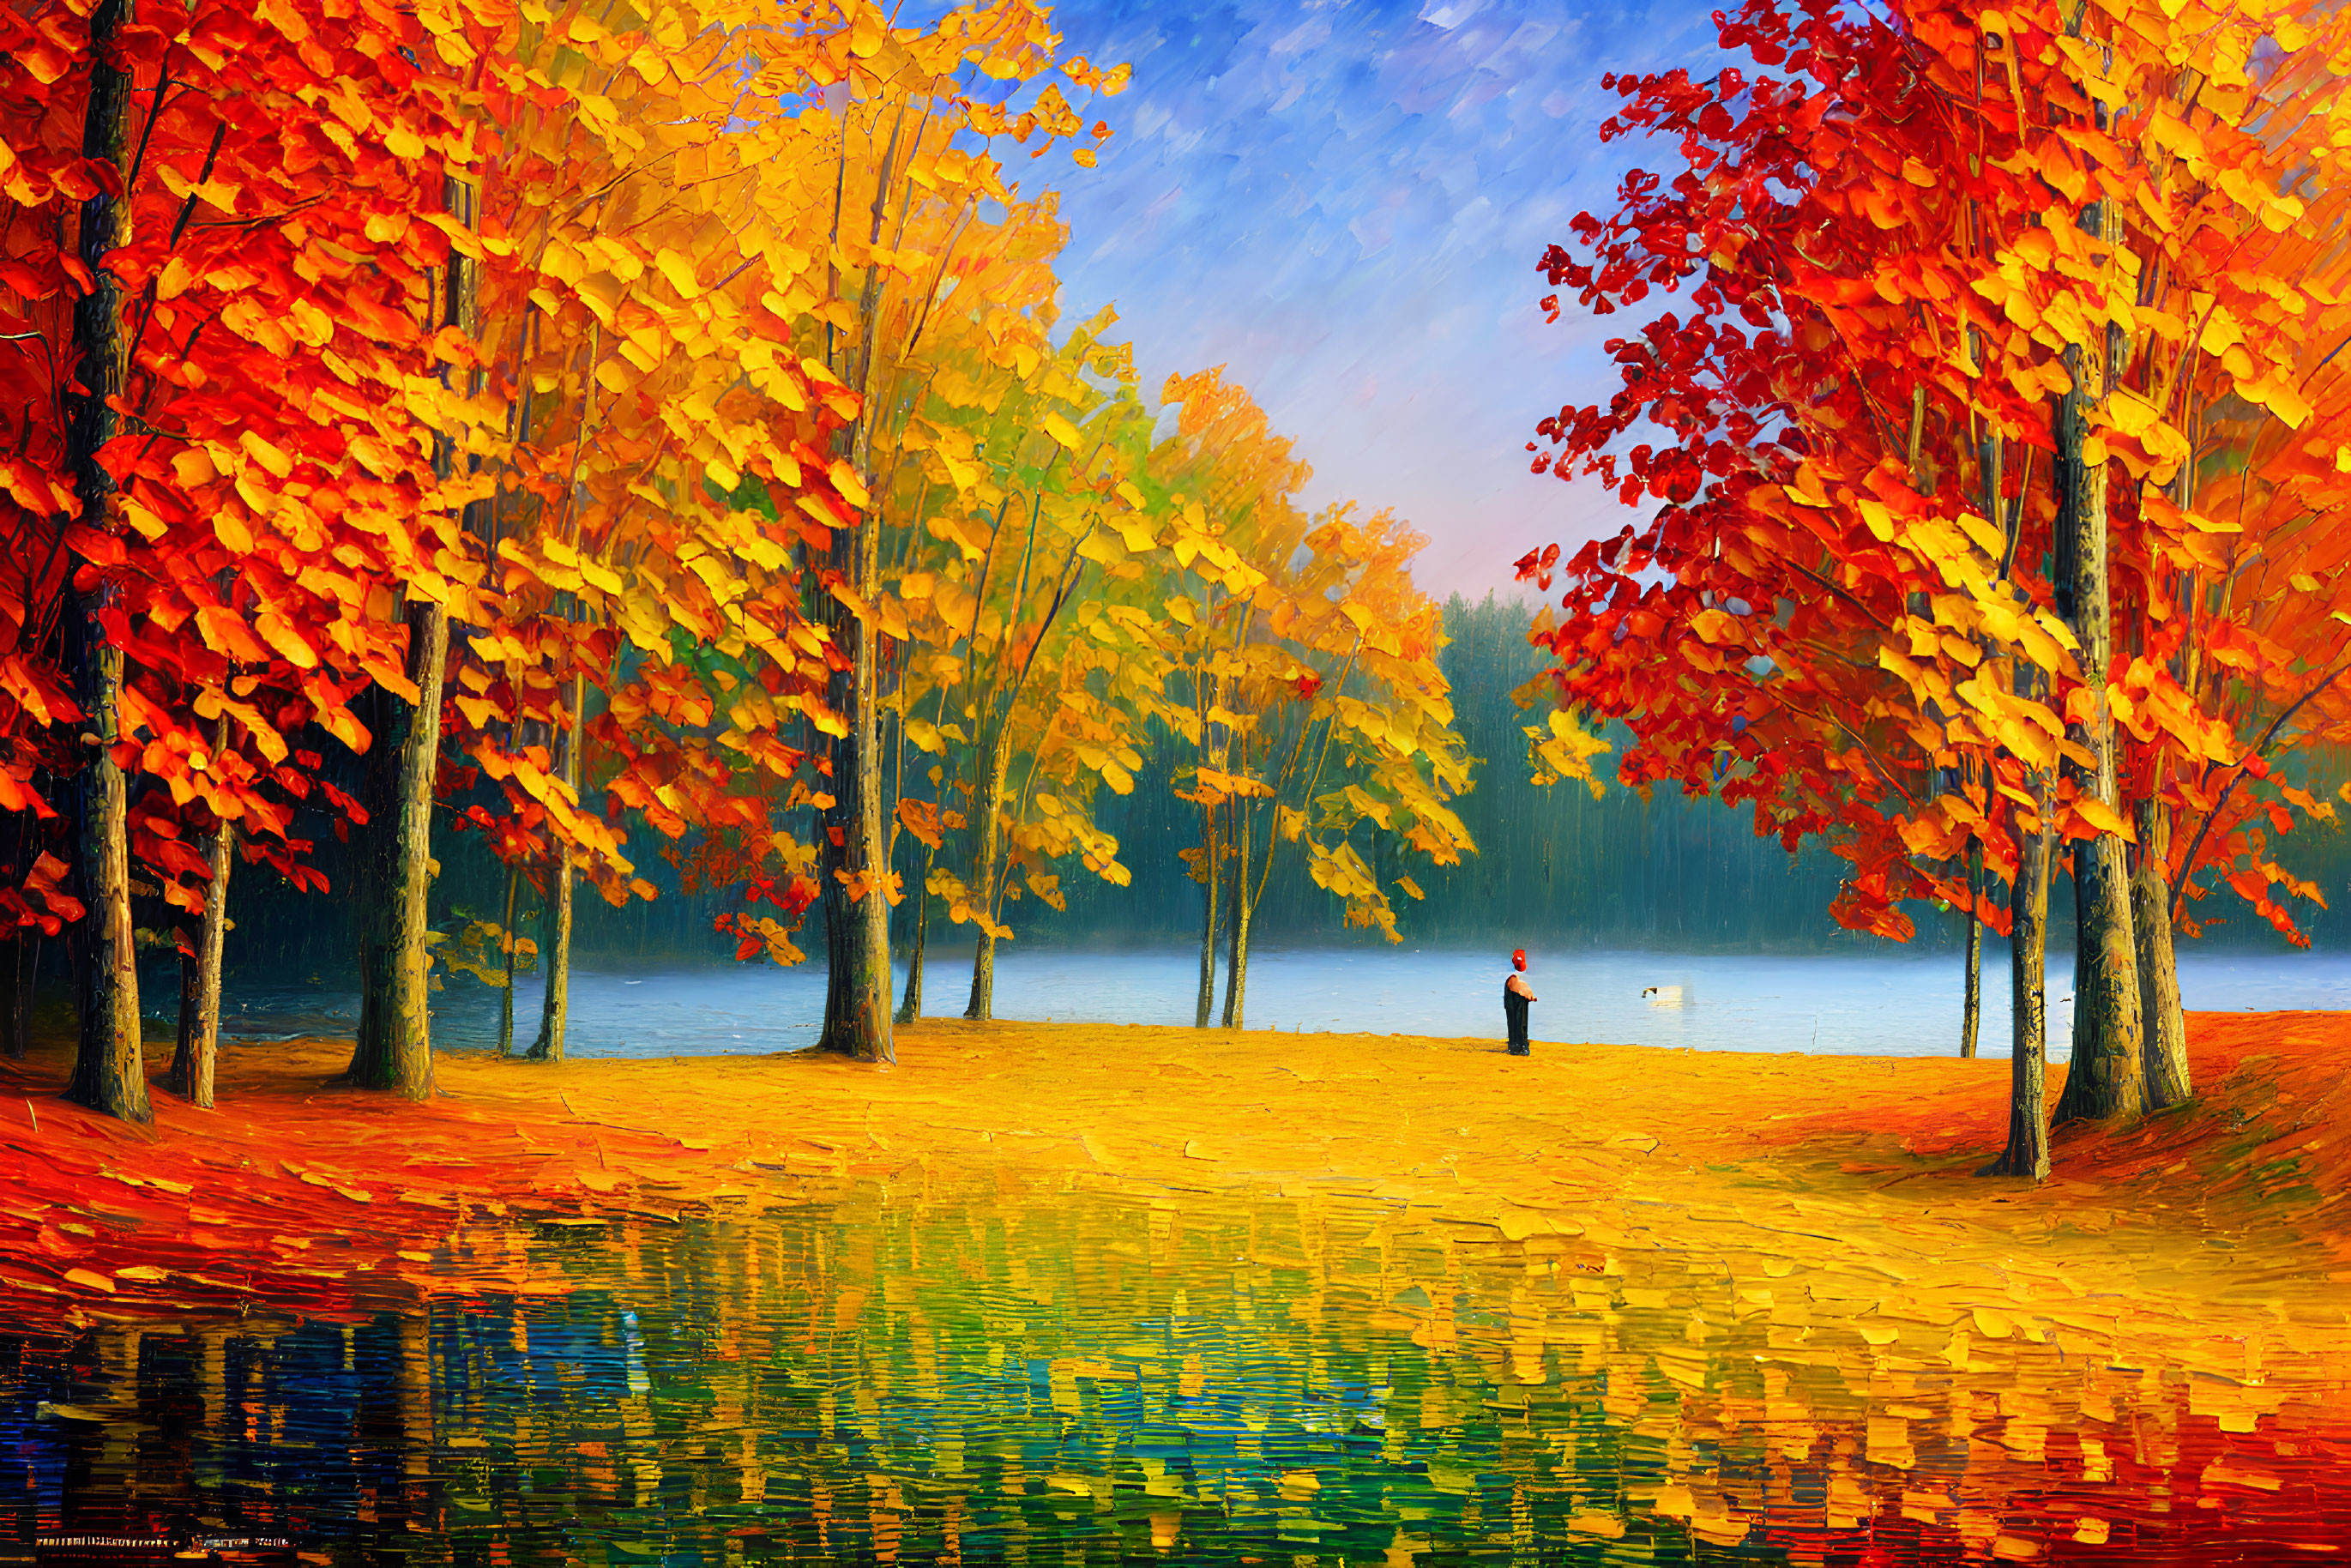 Person by a Lake in Vibrant Autumn Scene with Red and Orange Trees